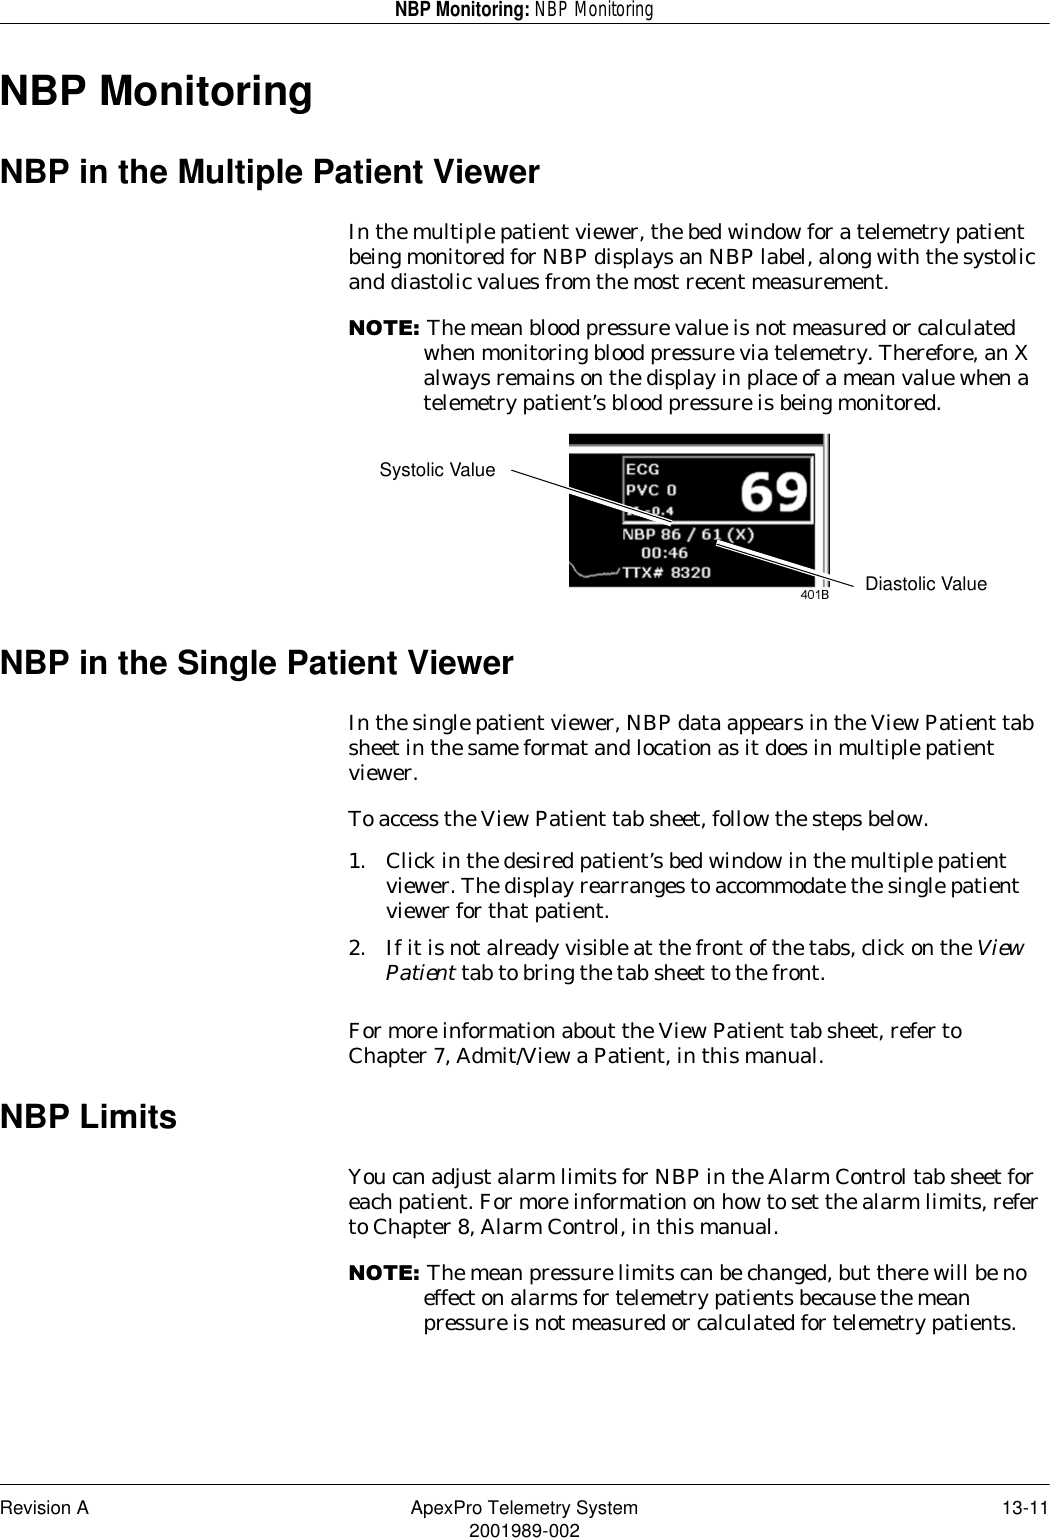 Revision A ApexPro Telemetry System 13-112001989-002NBP Monitoring: NBP MonitoringNBP MonitoringNBP in the Multiple Patient ViewerIn the multiple patient viewer, the bed window for a telemetry patient being monitored for NBP displays an NBP label, along with the systolic and diastolic values from the most recent measurement.127(The mean blood pressure value is not measured or calculated when monitoring blood pressure via telemetry. Therefore, an X always remains on the display in place of a mean value when a telemetry patient’s blood pressure is being monitored.NBP in the Single Patient ViewerIn the single patient viewer, NBP data appears in the View Patient tab sheet in the same format and location as it does in multiple patient viewer.To access the View Patient tab sheet, follow the steps below.1. Click in the desired patient’s bed window in the multiple patient viewer. The display rearranges to accommodate the single patient viewer for that patient.2. If it is not already visible at the front of the tabs, click on the View Patient tab to bring the tab sheet to the front.For more information about the View Patient tab sheet, refer to Chapter 7, Admit/View a Patient, in this manual.NBP LimitsYou can adjust alarm limits for NBP in the Alarm Control tab sheet for each patient. For more information on how to set the alarm limits, refer to Chapter 8, Alarm Control, in this manual.127(The mean pressure limits can be changed, but there will be no effect on alarms for telemetry patients because the mean pressure is not measured or calculated for telemetry patients.Systolic ValueDiastolic Value